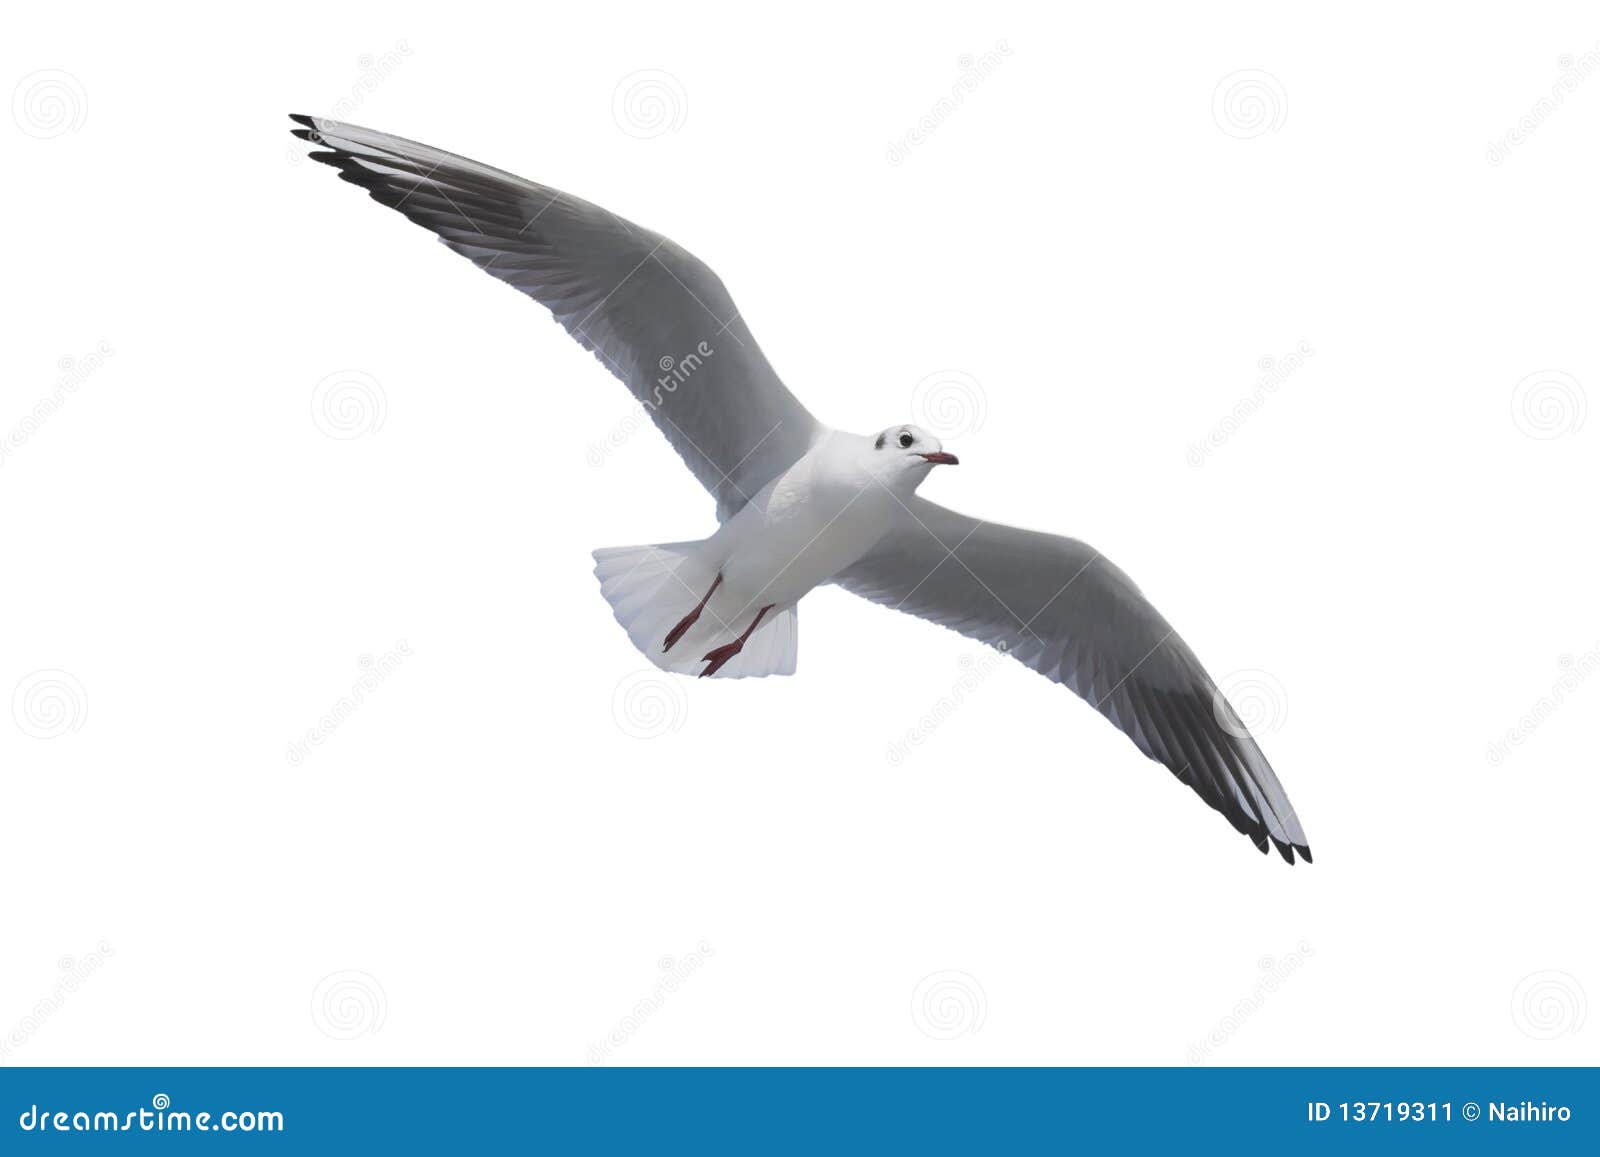 the sea gull in a white back flies